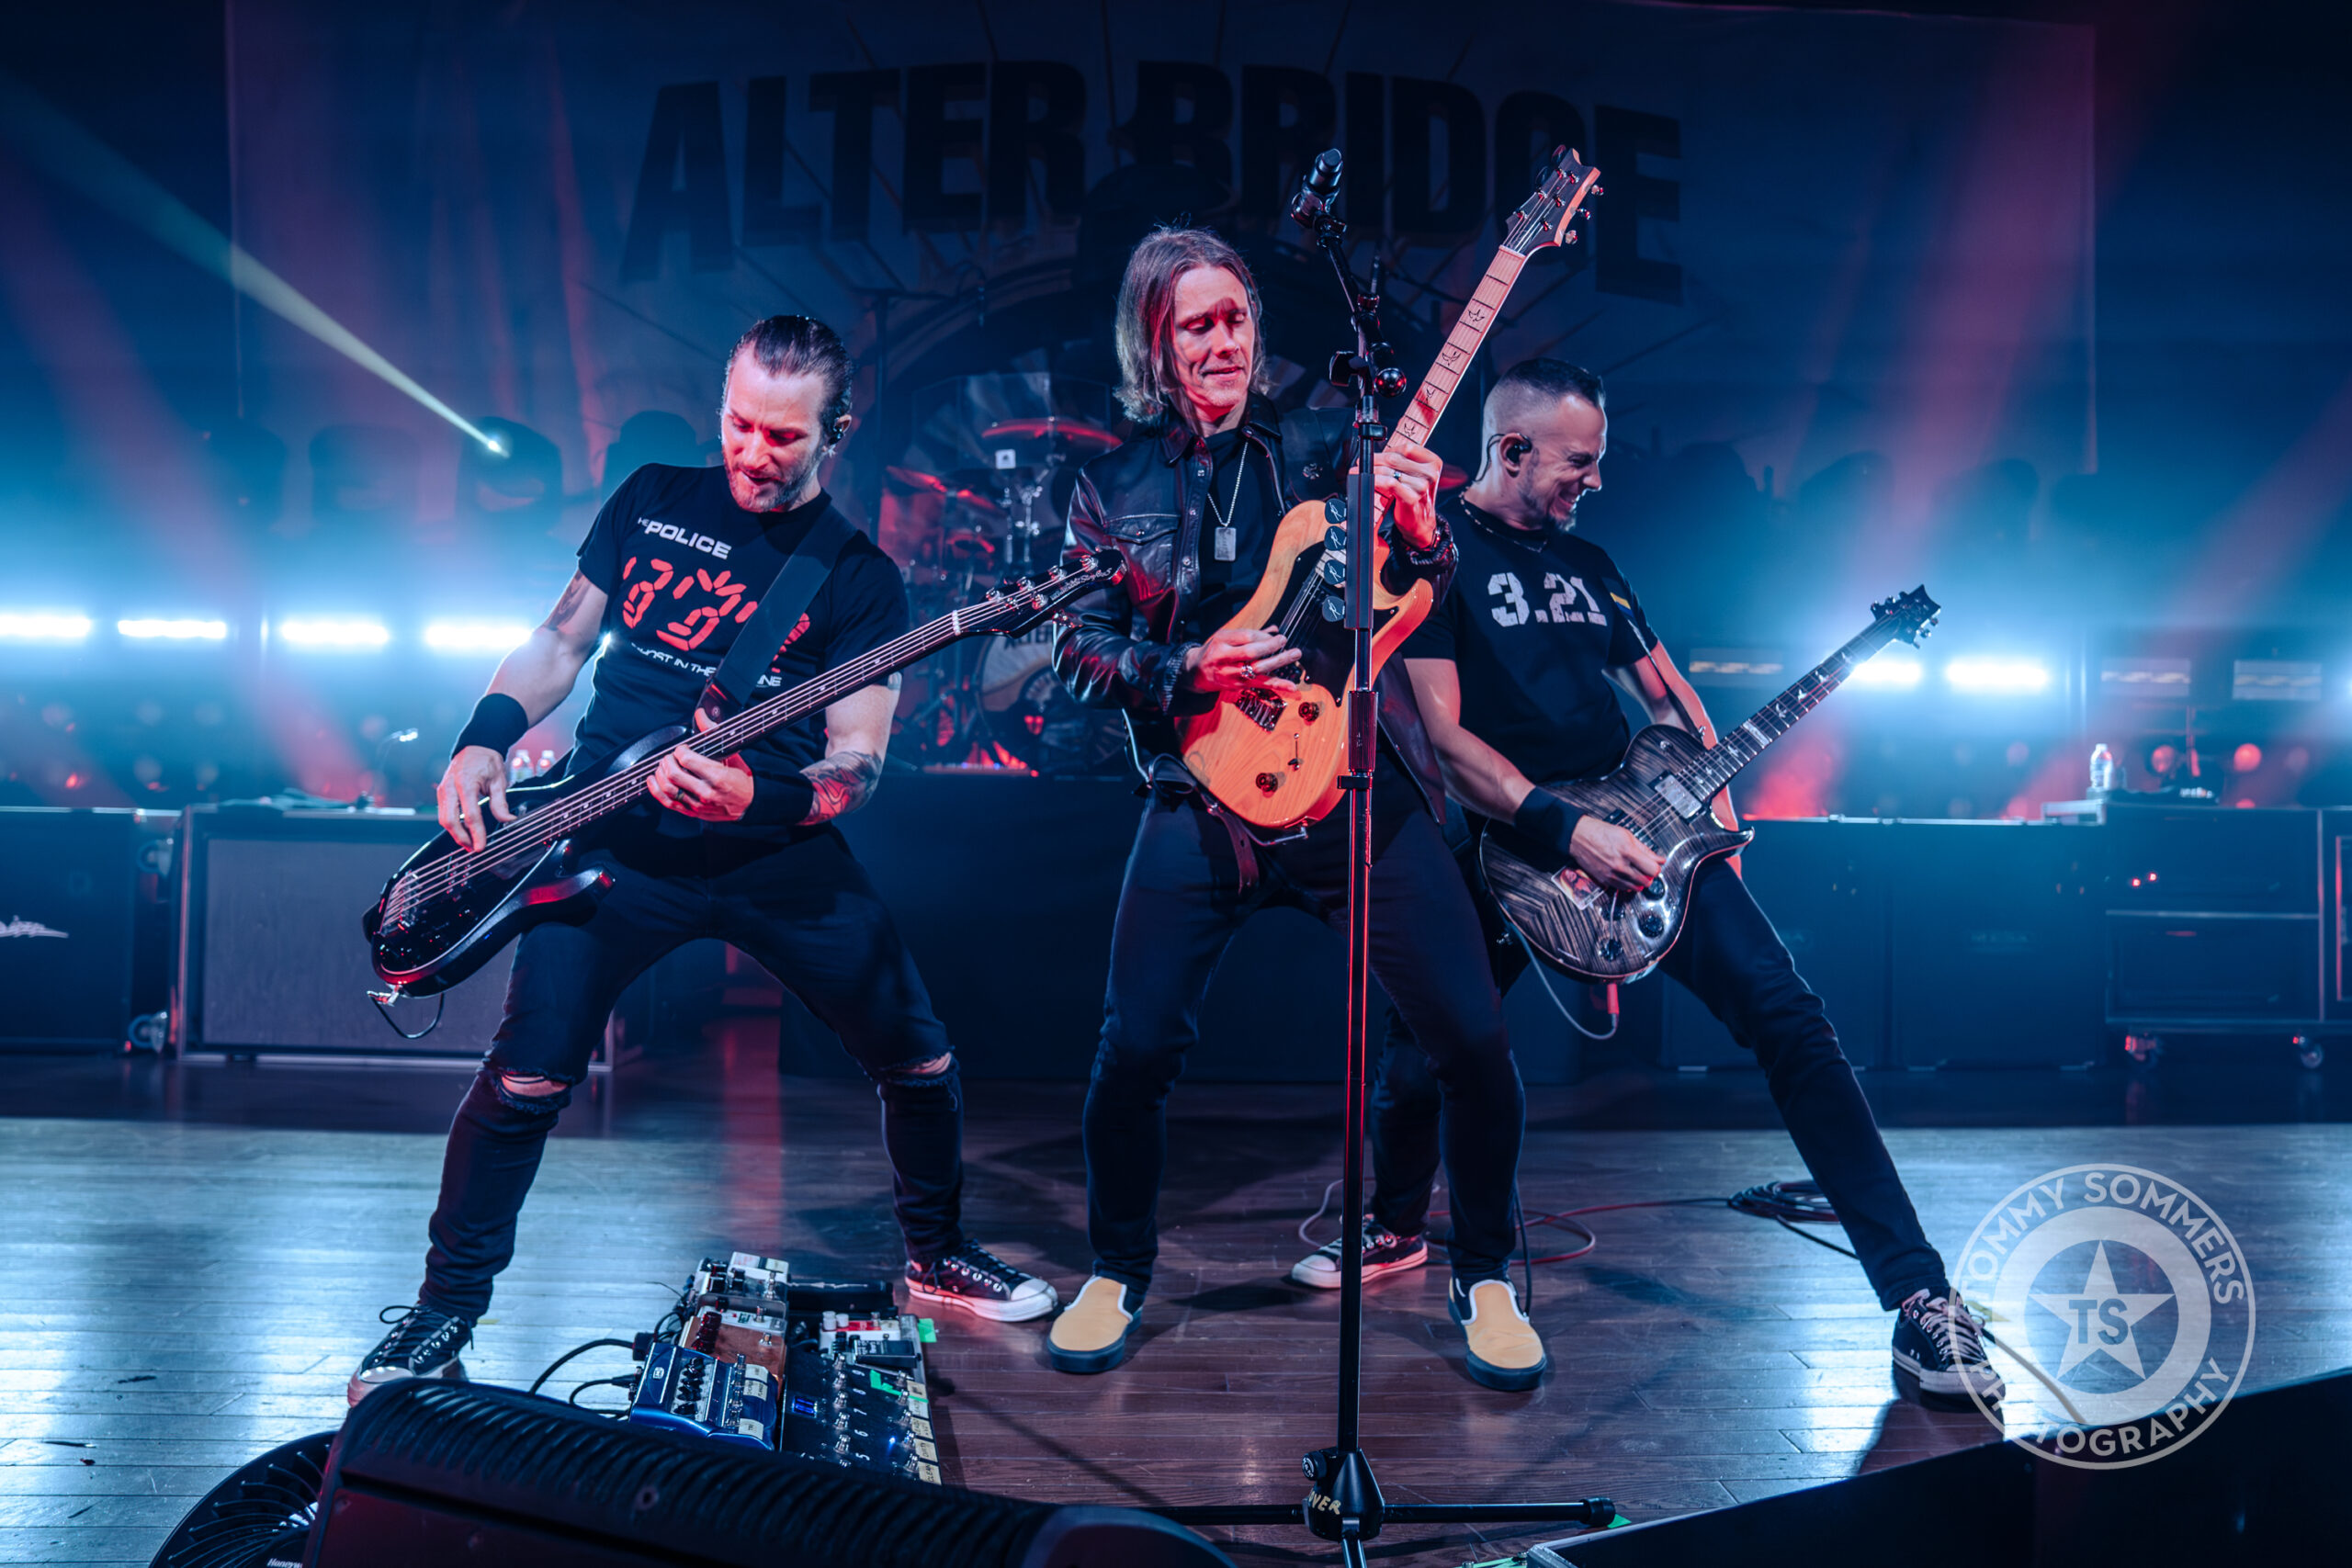 Alter Bridge with Sevendust and MJT - Pawns & Kings Tour — FARGO BREWING  COMPANY